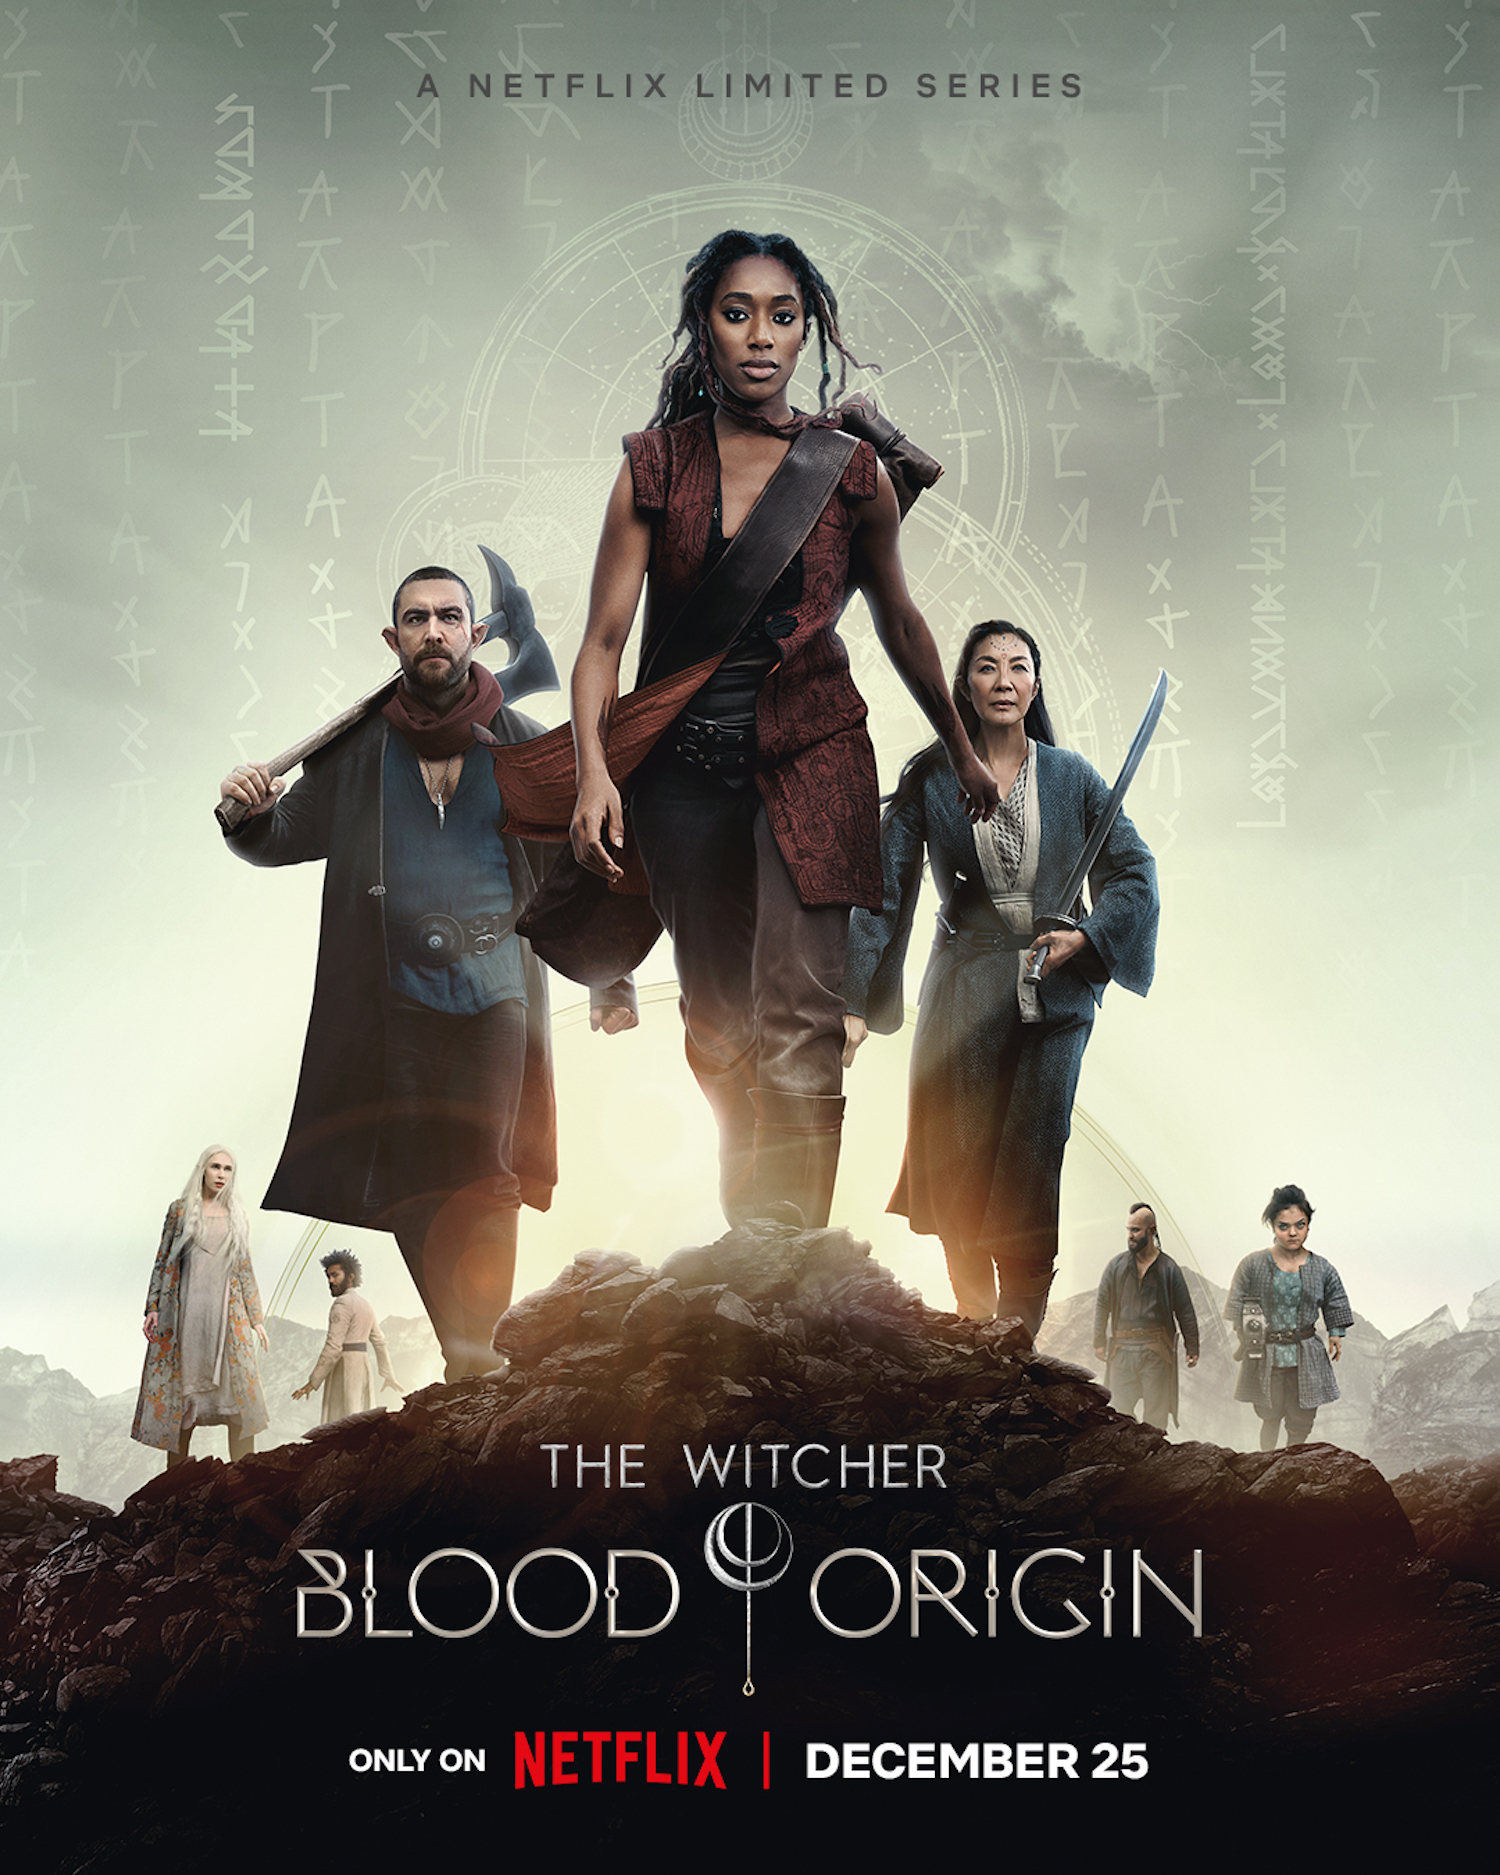 Sophia Brown, Laurence O’Fuarain, and Michelle Yeoh in 'The Witcher: Blood Origin'